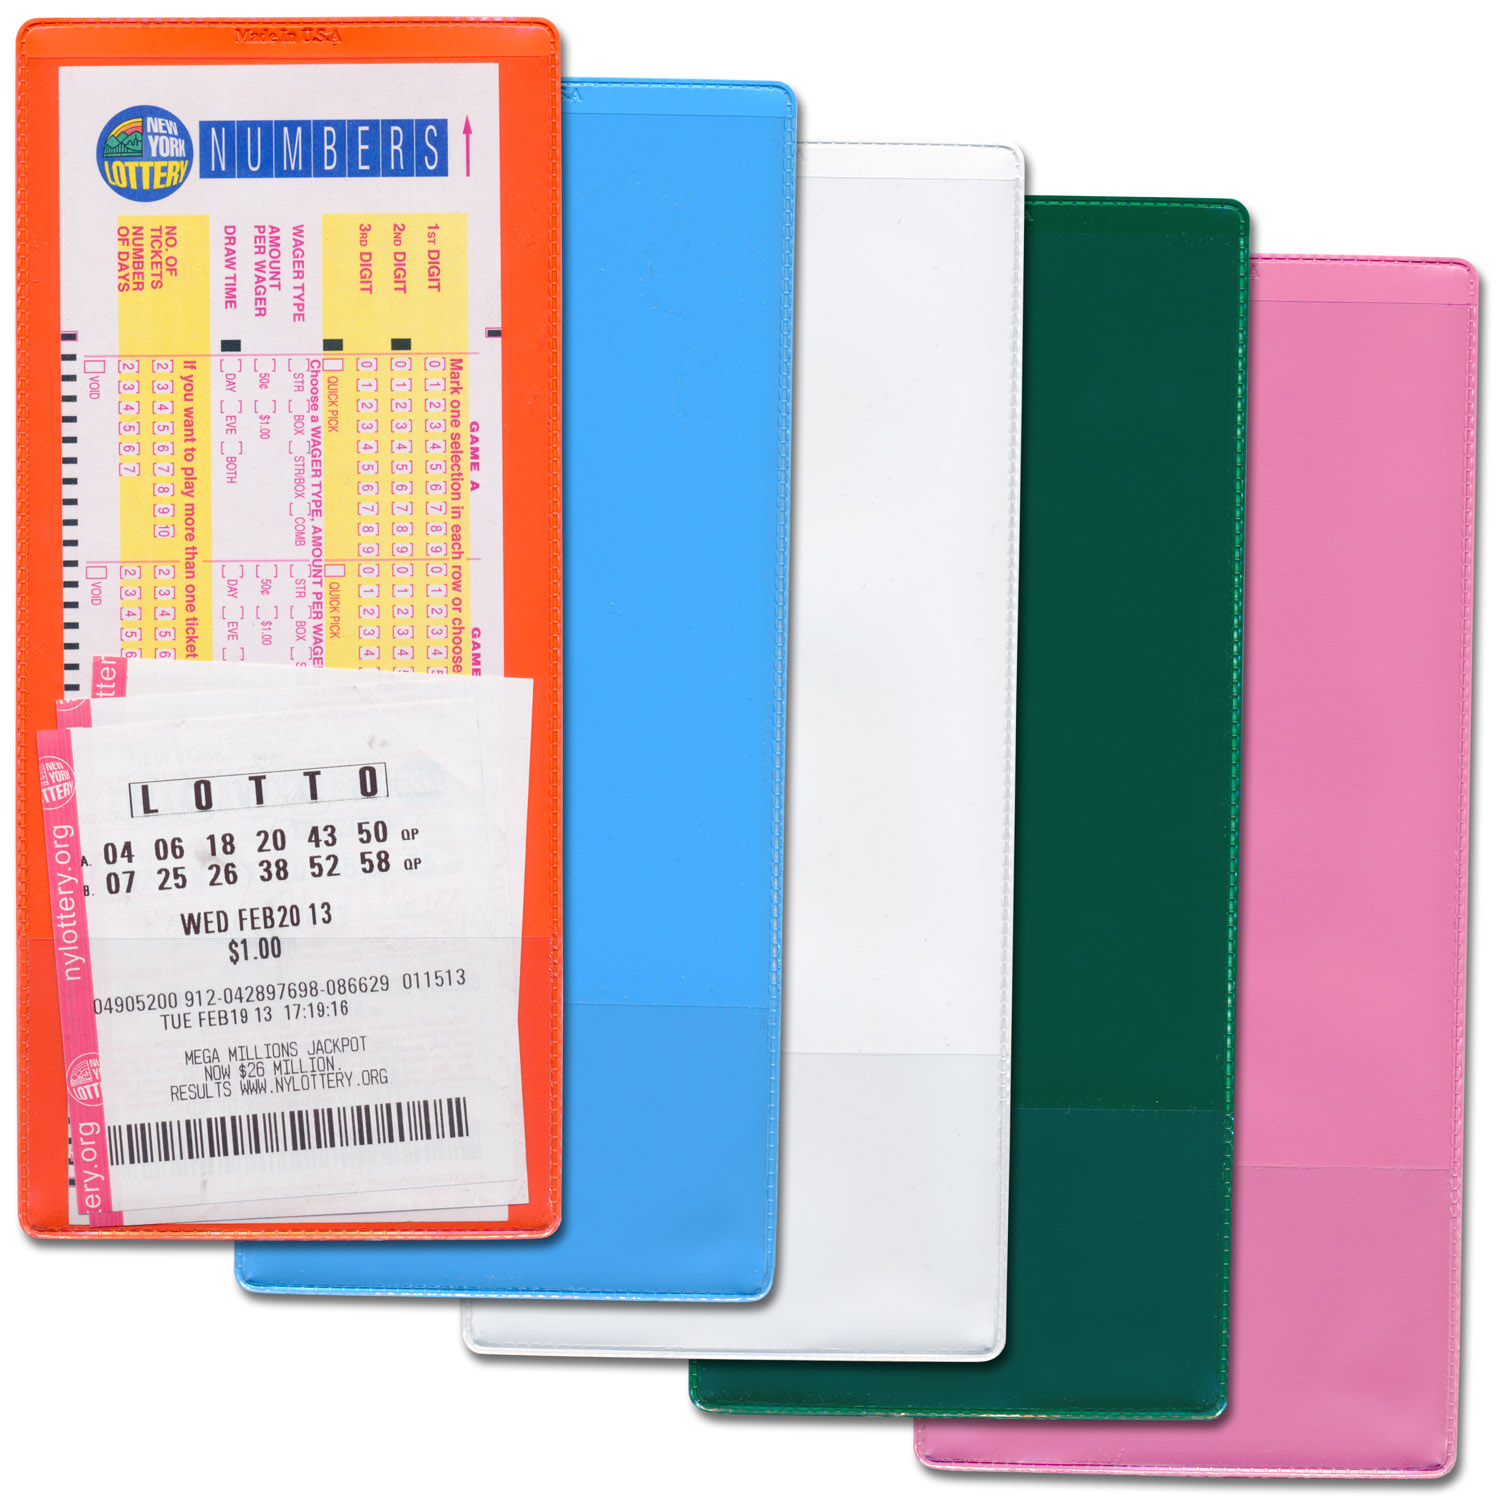 Press Room: Lottery Ticket Holders: StoreSMART - Filing, Organizing, and  Display for Office, School, Warehouse, and Home